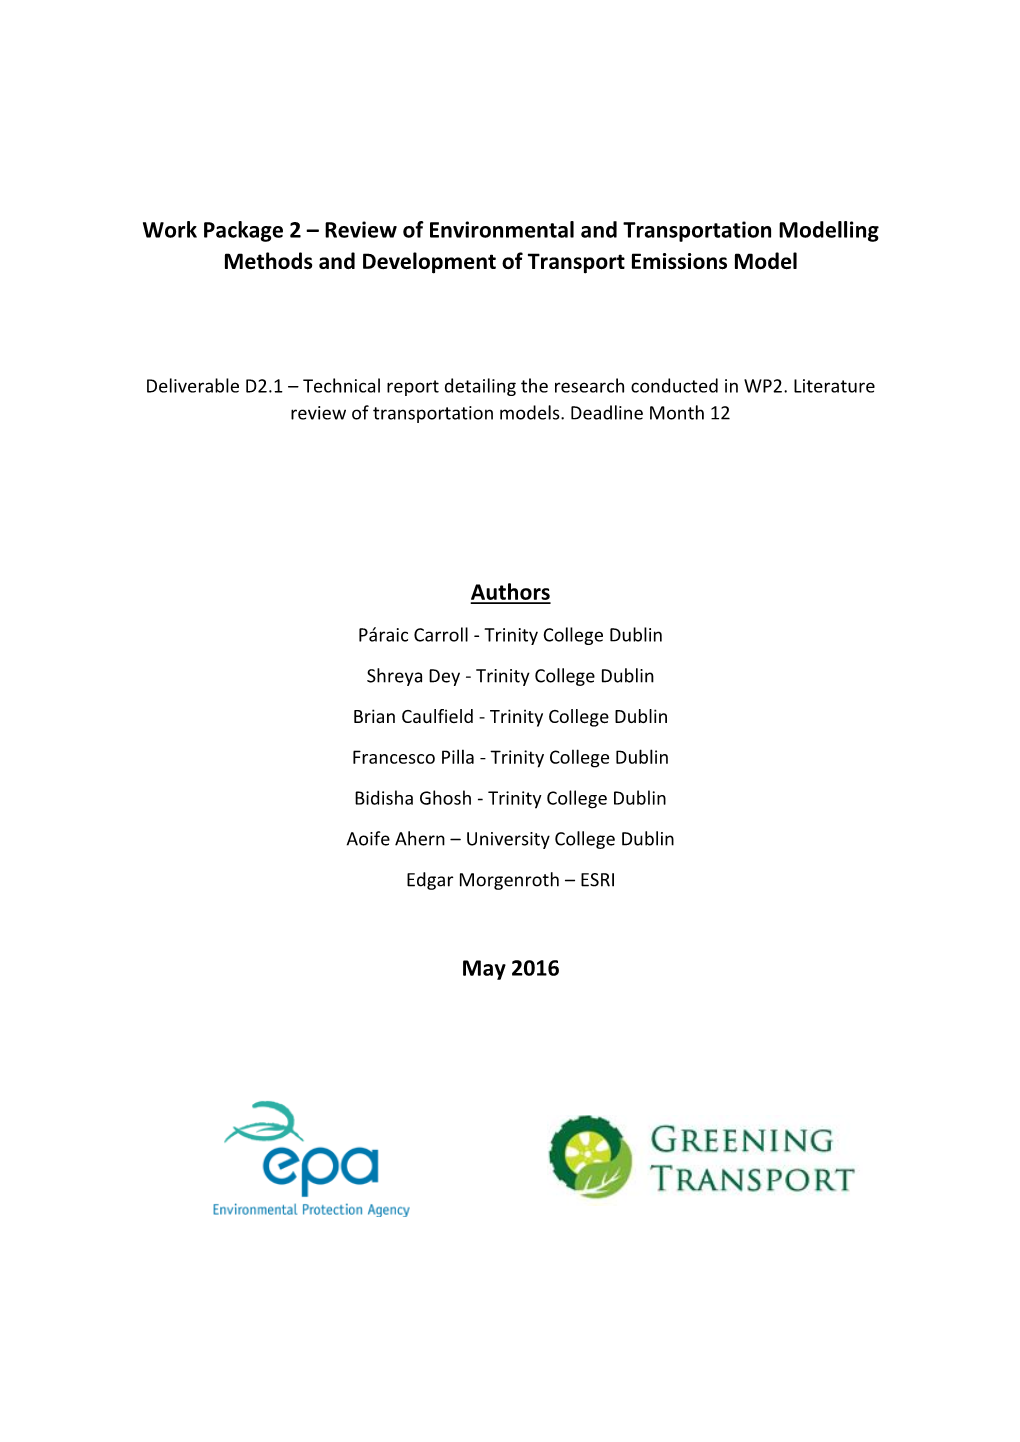 Review of Environmental and Transportation Modelling Methods and Development of Transport Emissions Model